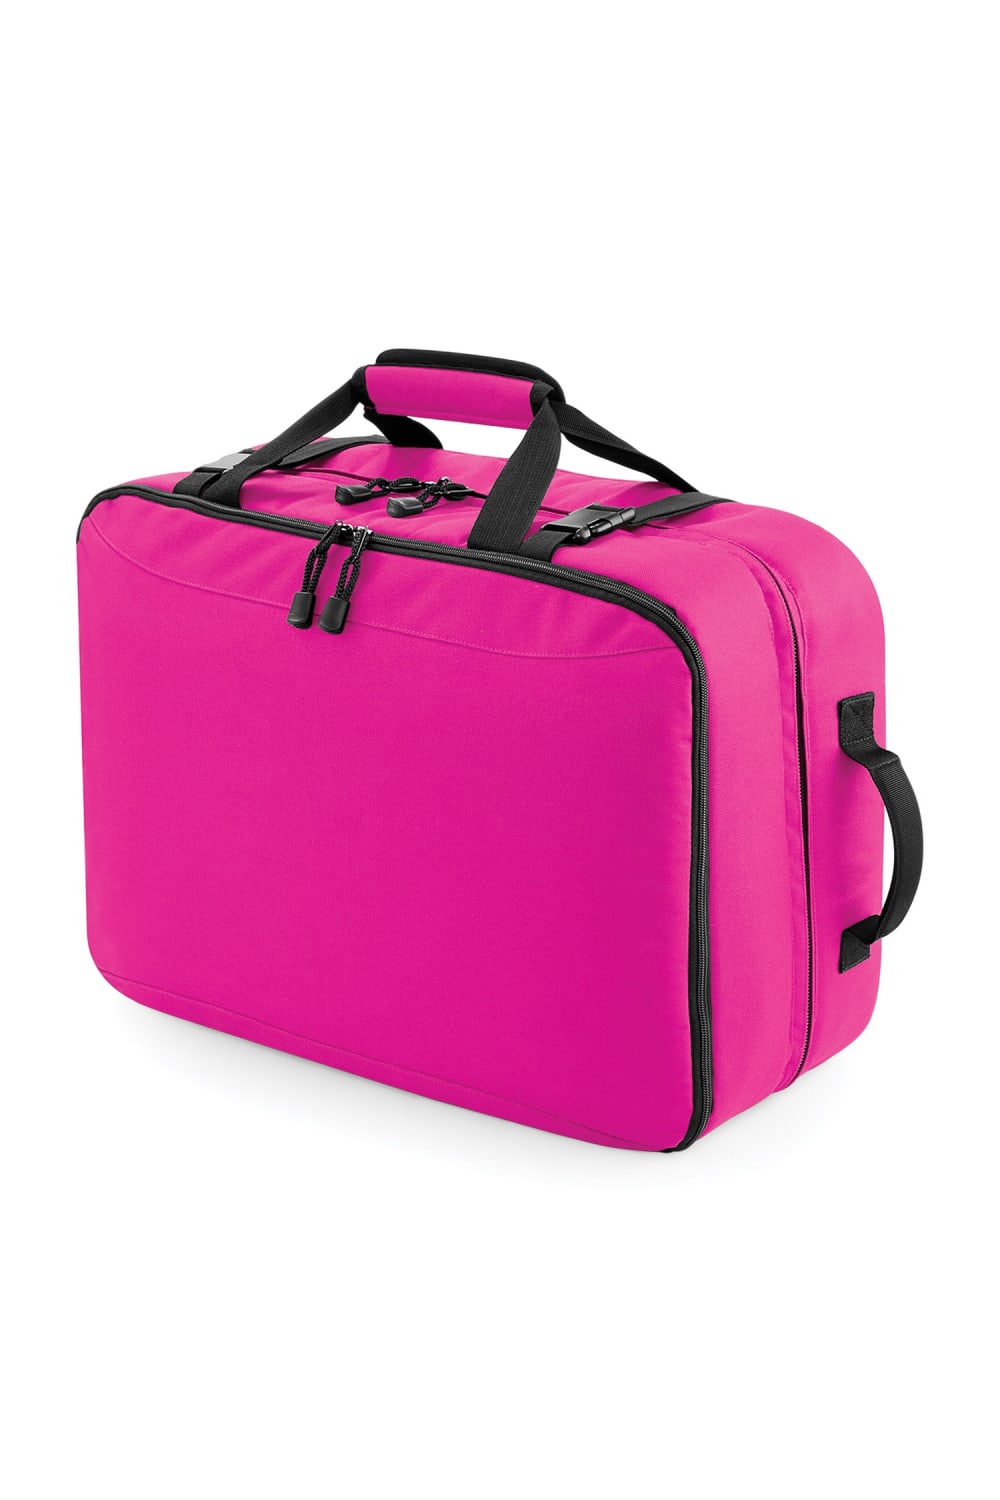 Bagbase Escape Ultimate Cabin Carryall Travel Bag (8 Gallons) (Pack of 2) (Fuchsia) (One Size)